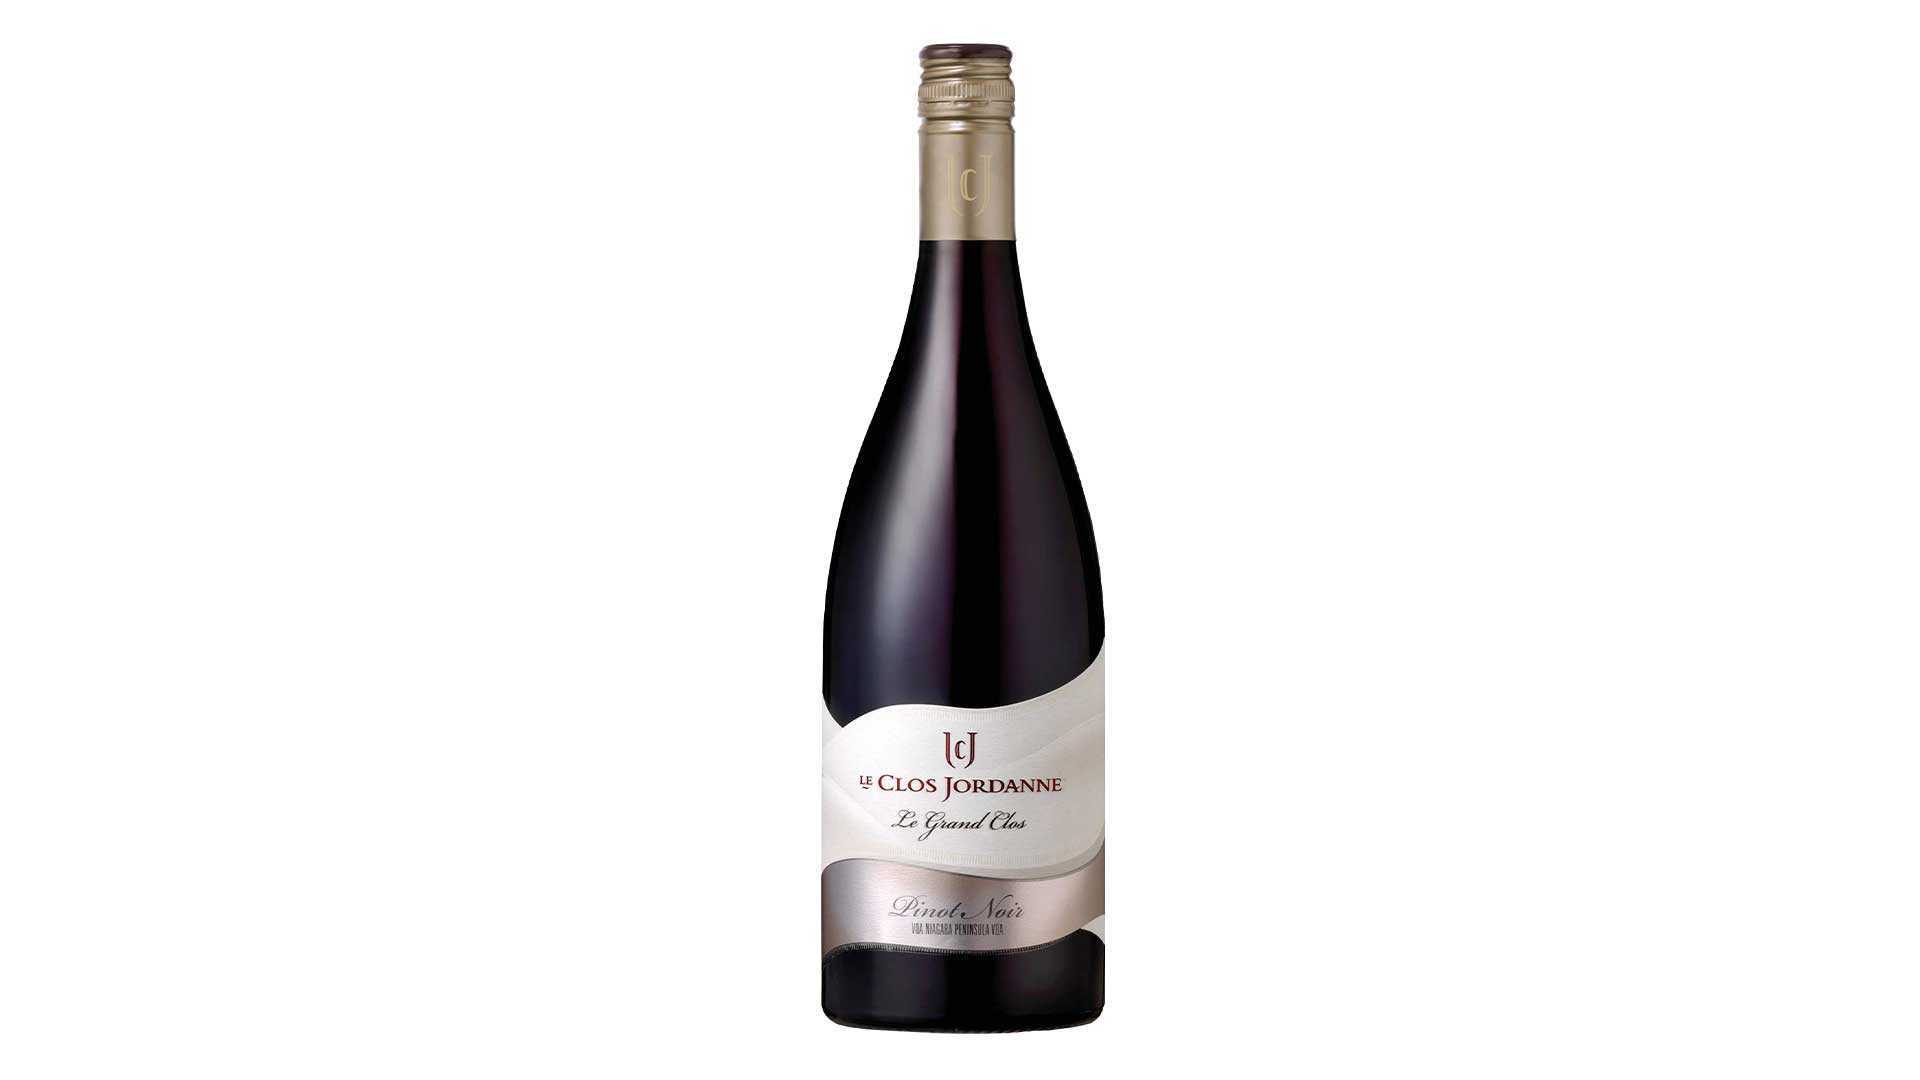 Wine and cheese pairings from Principle Fine Wines | Le Clos Jordanne Le Grand Clos Pinot Noir 2019